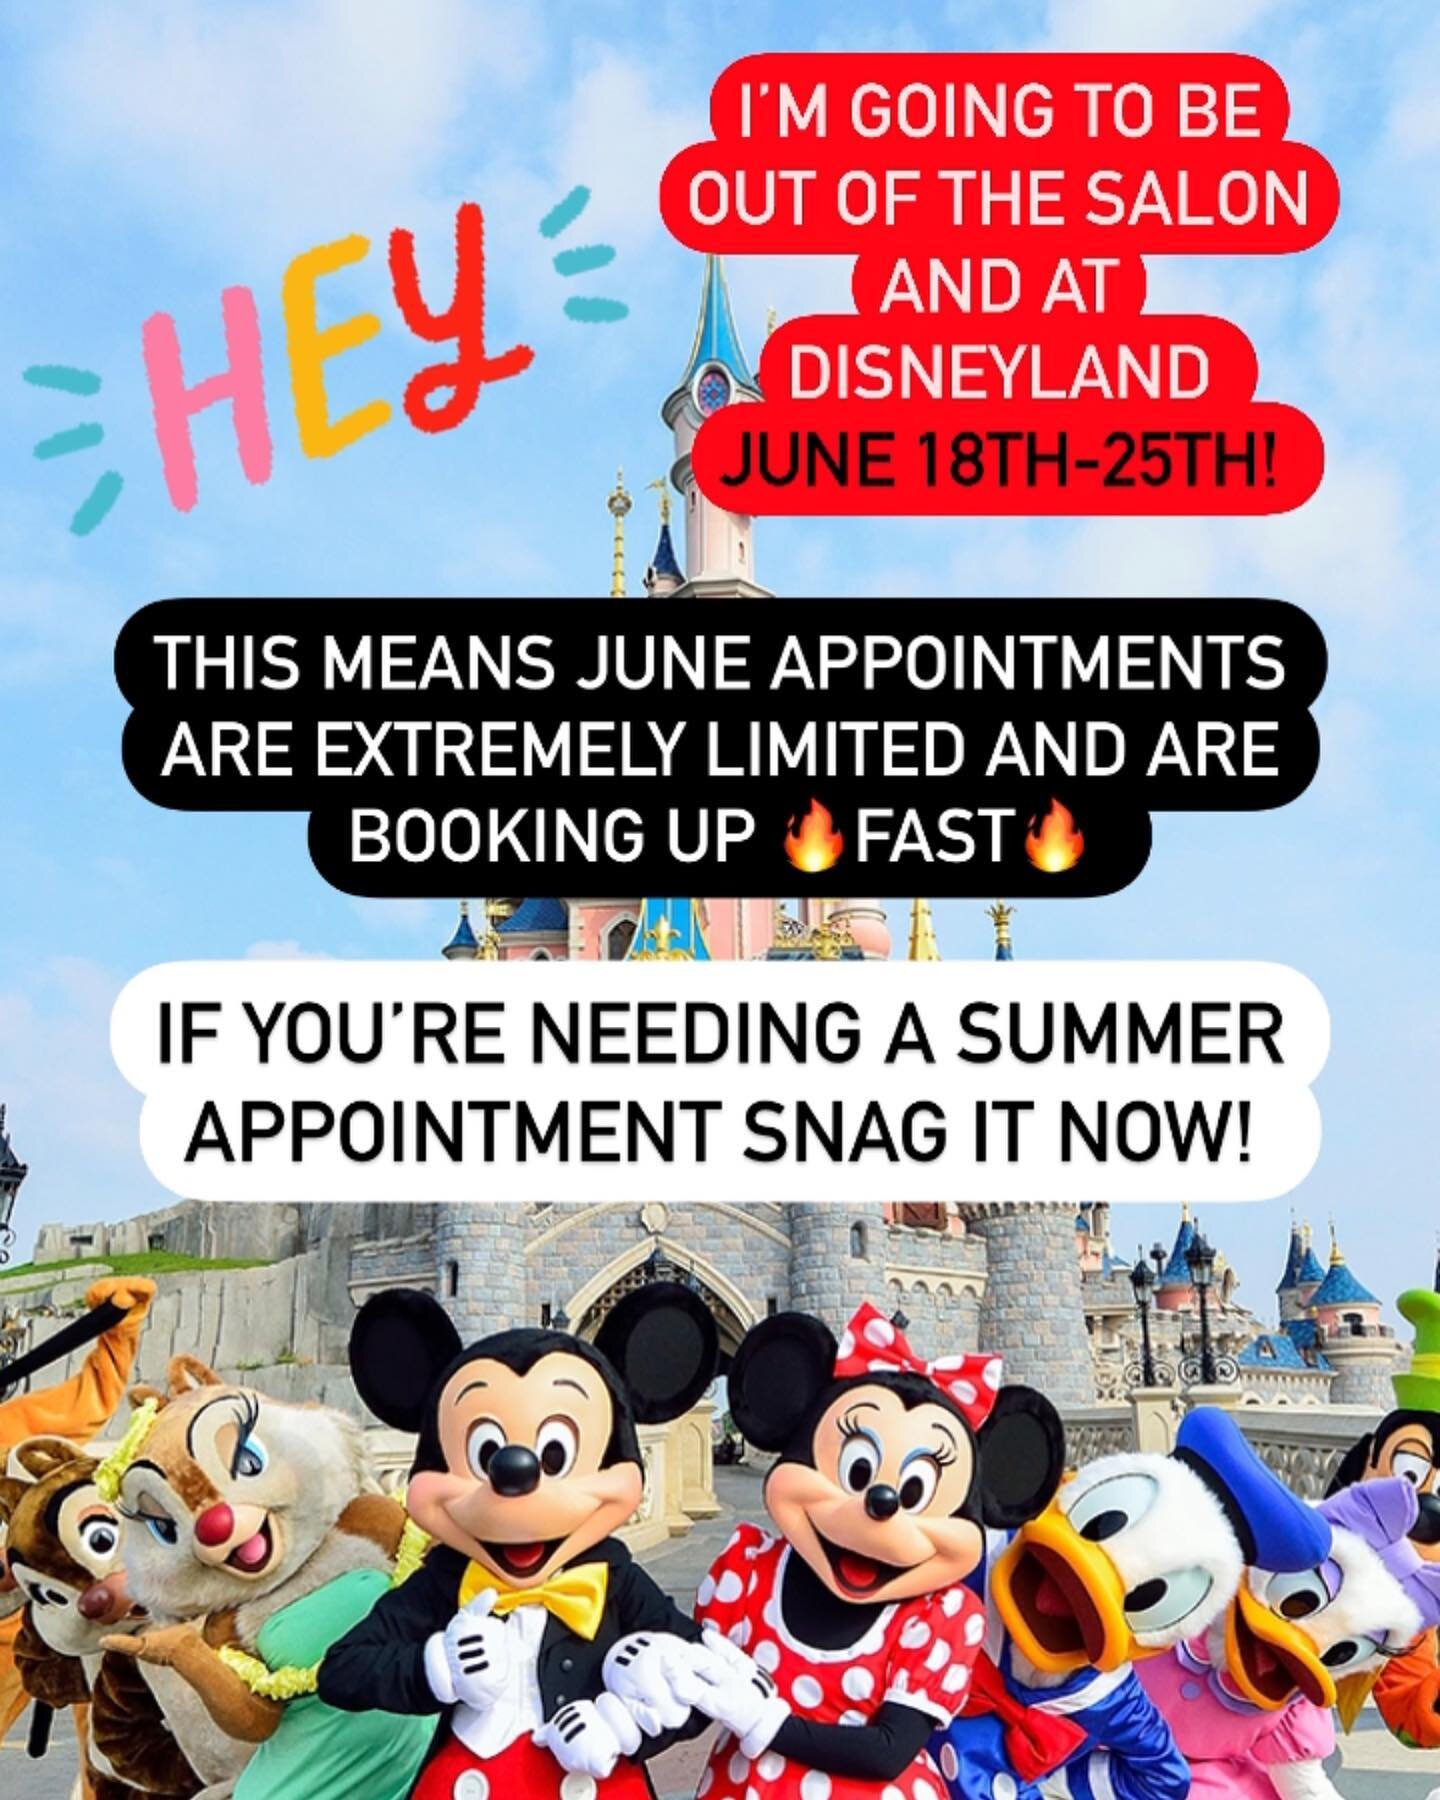 🐭OUT WITH THE MOUSE🐭

My husband and I are going to Disneyland and NintendoWorld this summer to live out our childhood dreamsssss ⭐️😻

I&rsquo;ll be out of the salon June 18-25th so be sure to book your appointments now before they&rsquo;re all go